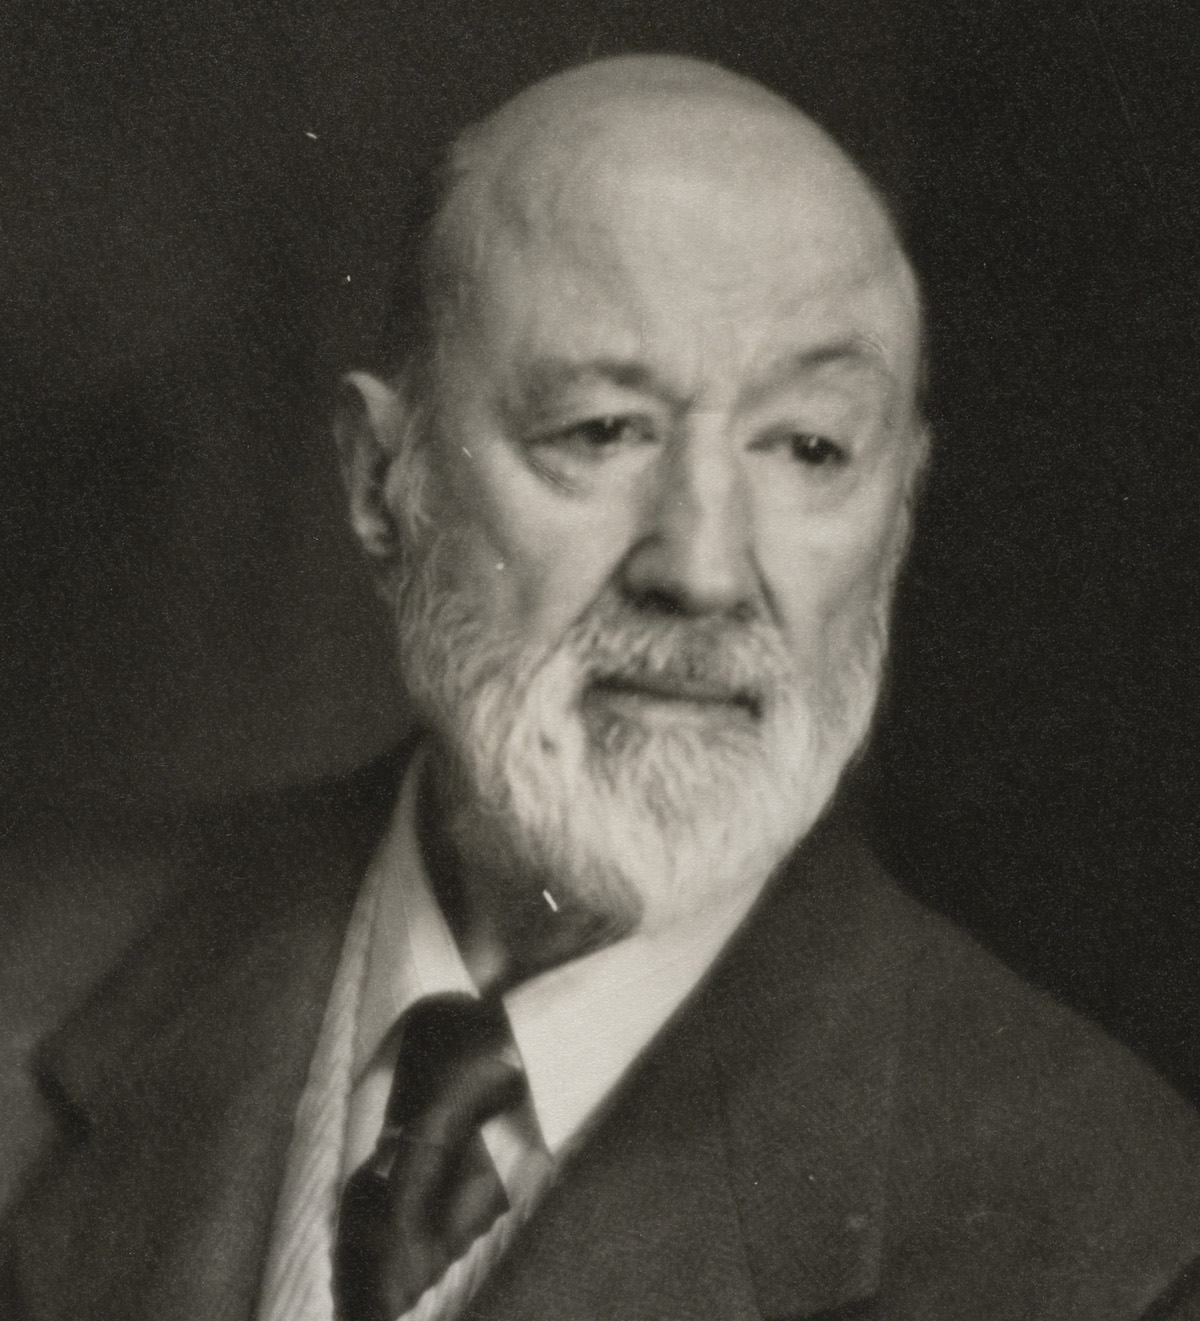 Charles Ives, c. 1947. Portrait of by Clara Sipprell